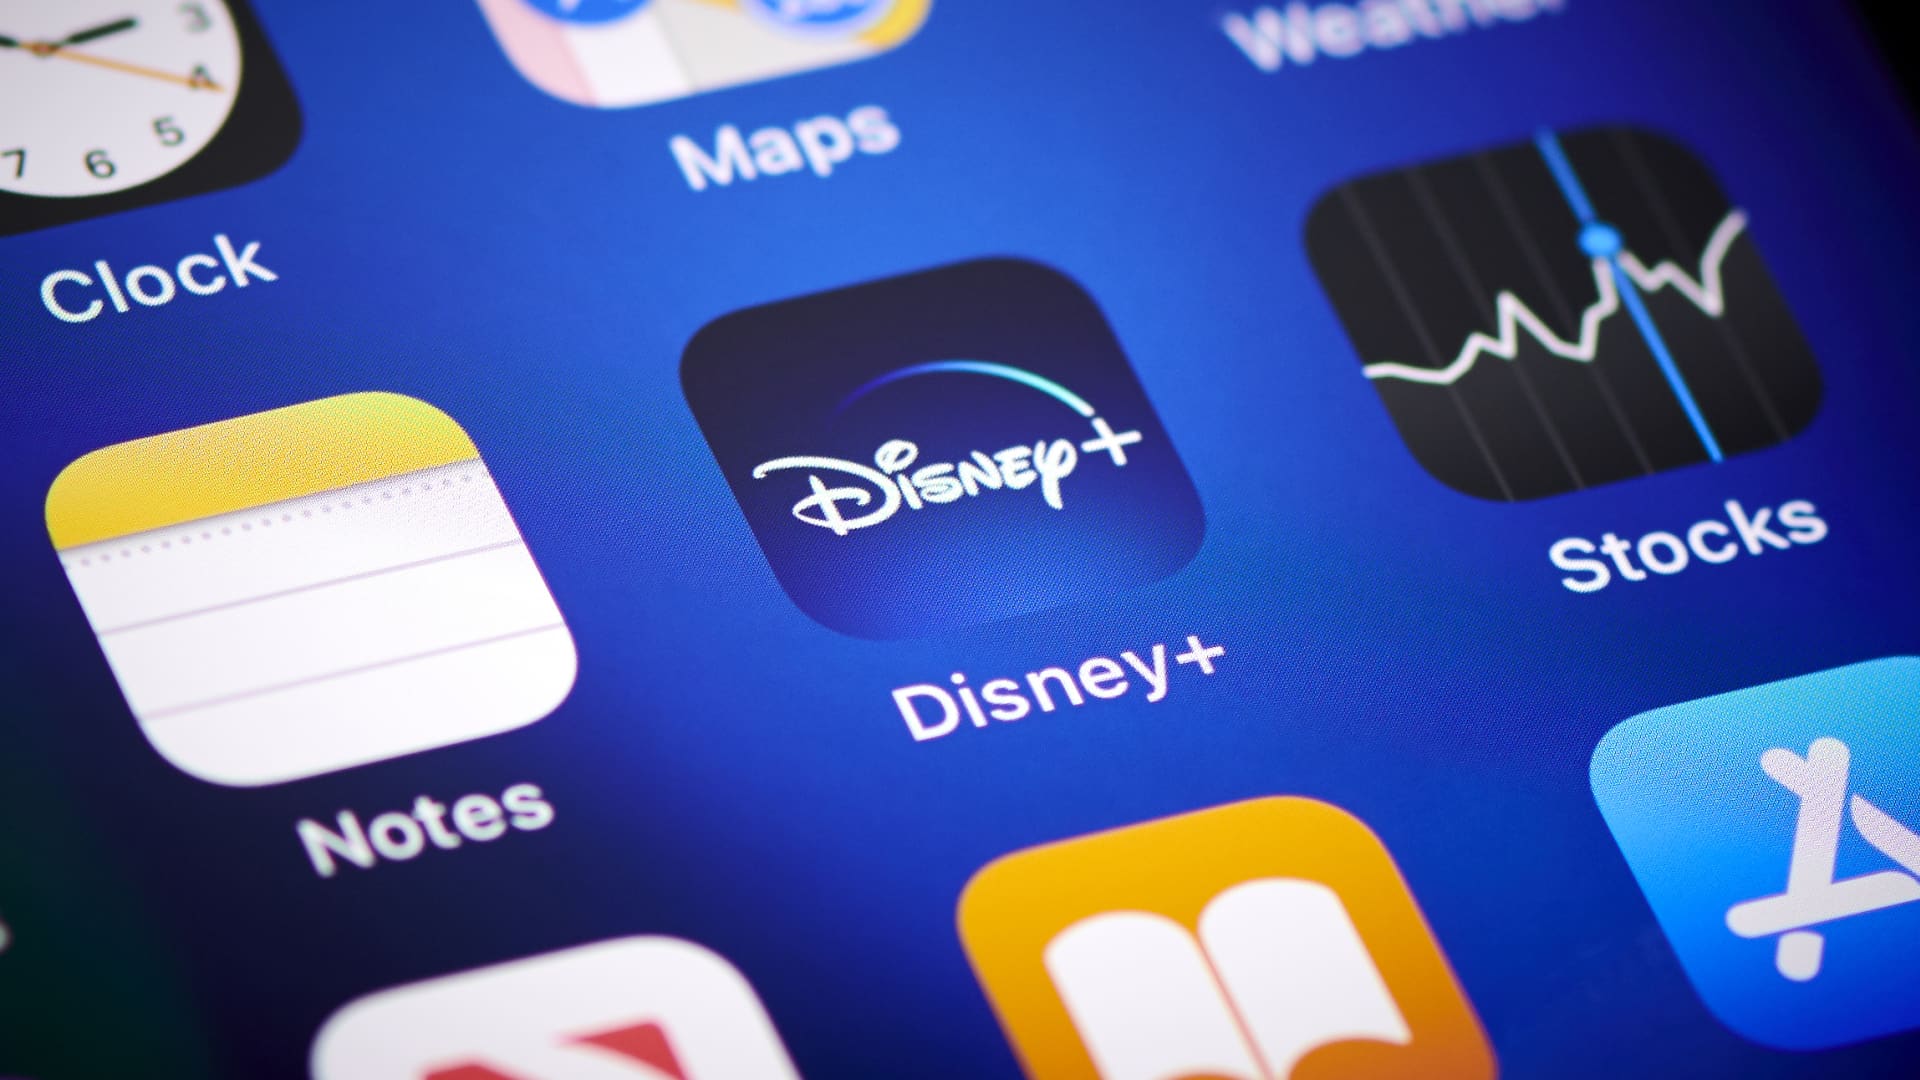 Close-up detail of the Disney+ app icon on an Apple iPhone 12 Pro smartphone screen.